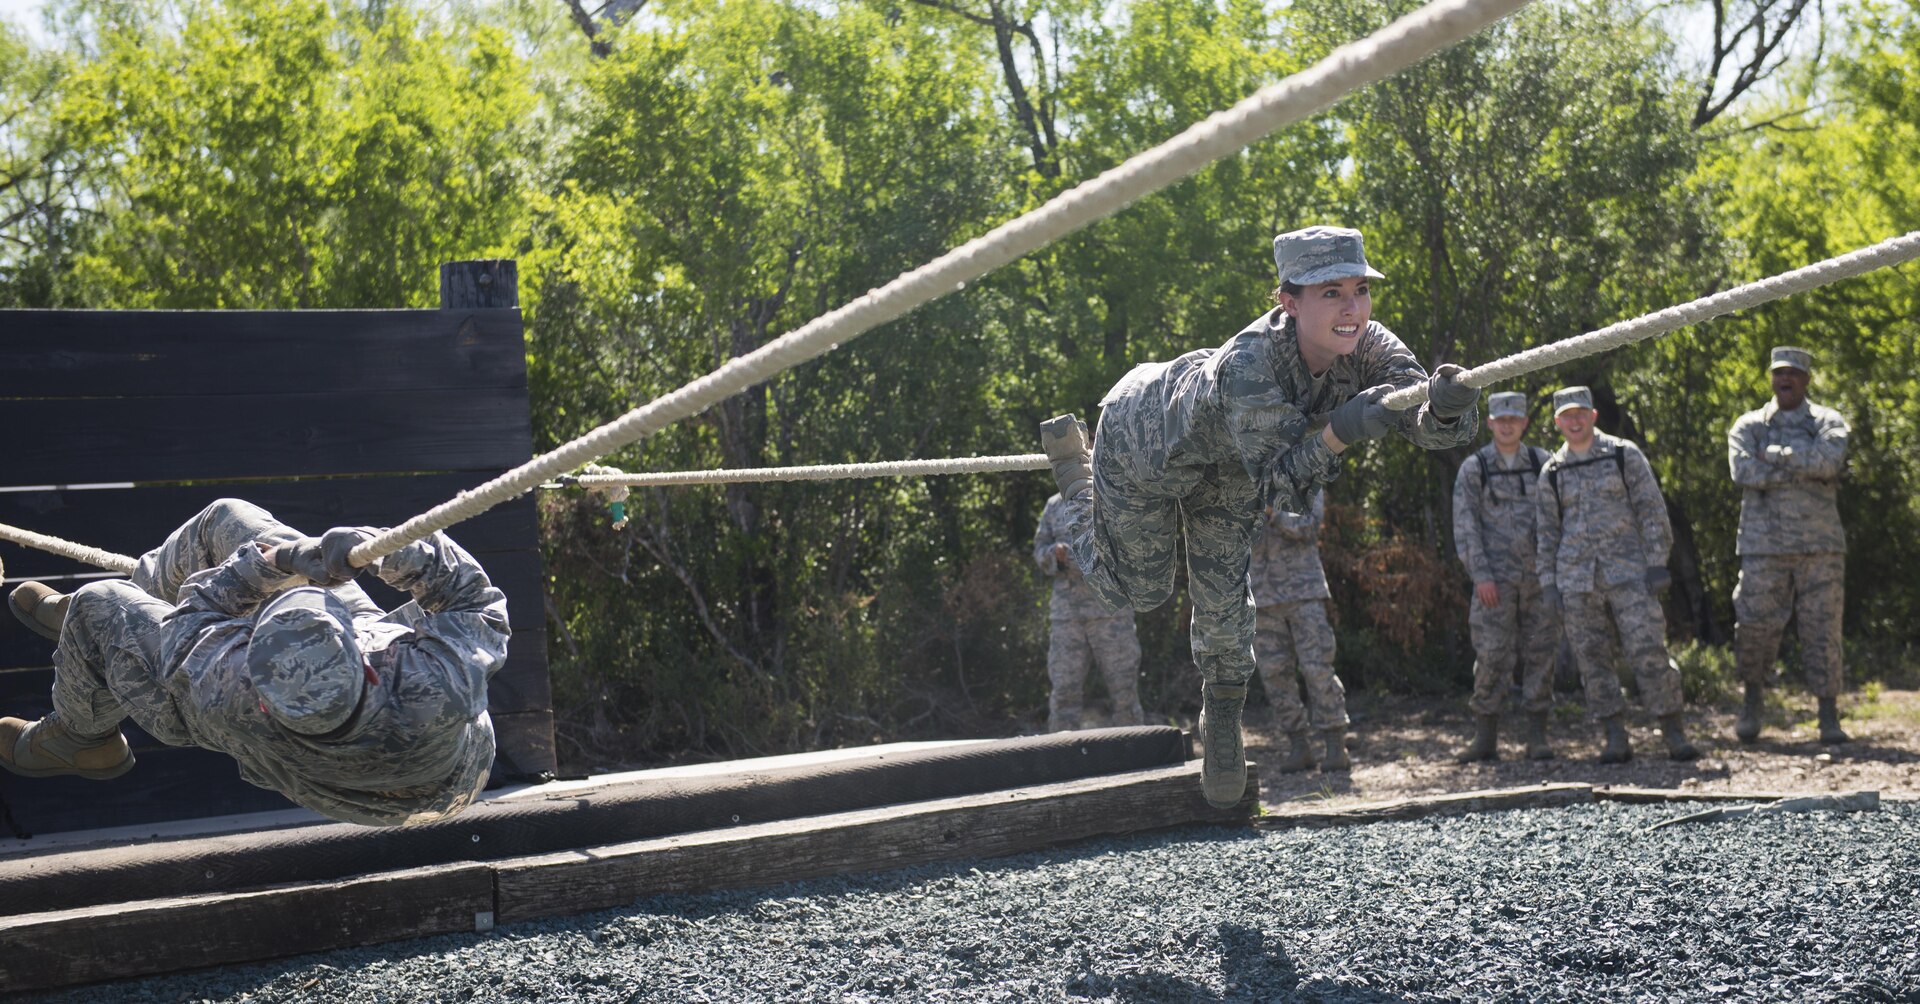 Chaplain candidates attempt to complete one of the Creating Leader Airmen Warriors, or CLAW, course's obstacles during a tour of the Basic Expeditionary Airmen Skills Training at Joint Base San Antonio-Lackland, Texas, July 5, 2017. The tour was part of the Chaplain Candidate Intensive Internship. (U.S. Air Force photo by Senior Airman Krystal Wright)